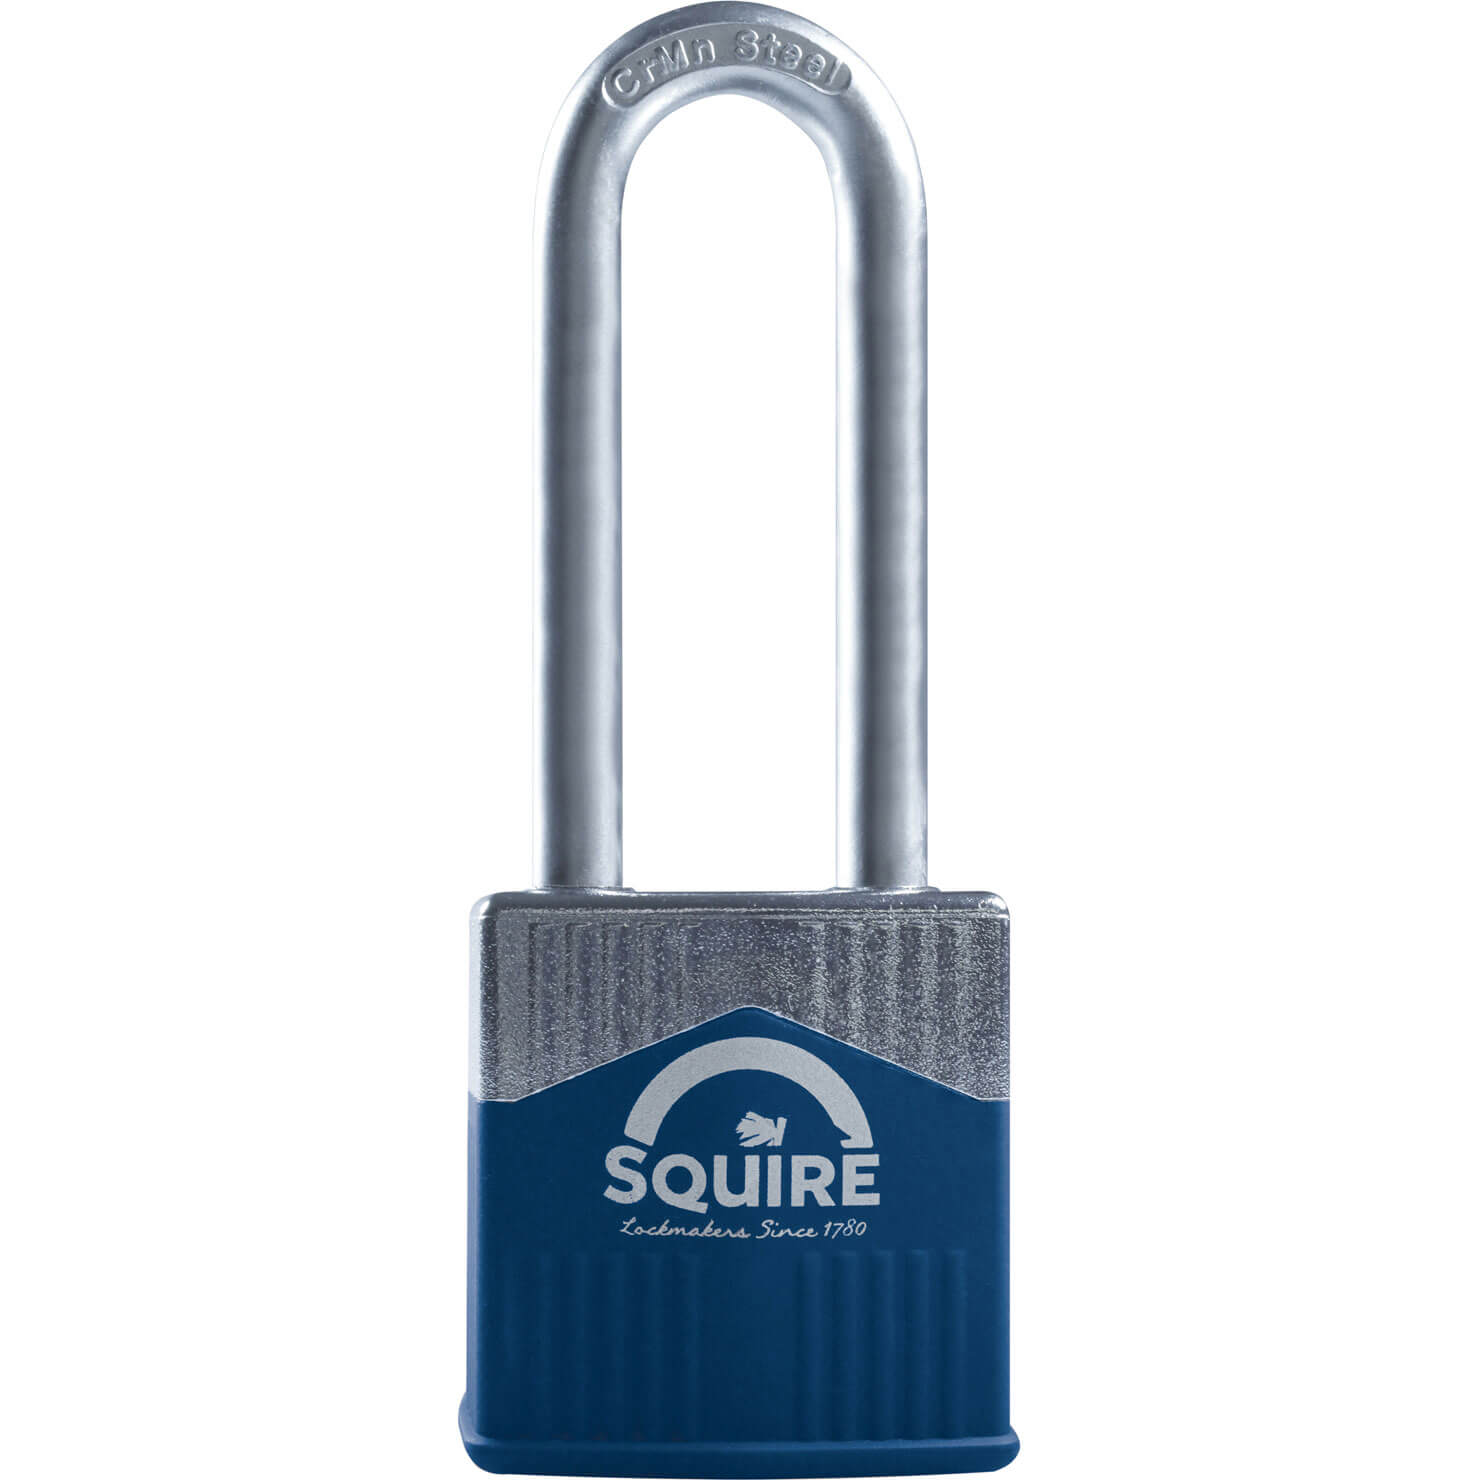 Henry Squire Warrior High Security Shackle Padlock 45mm Long